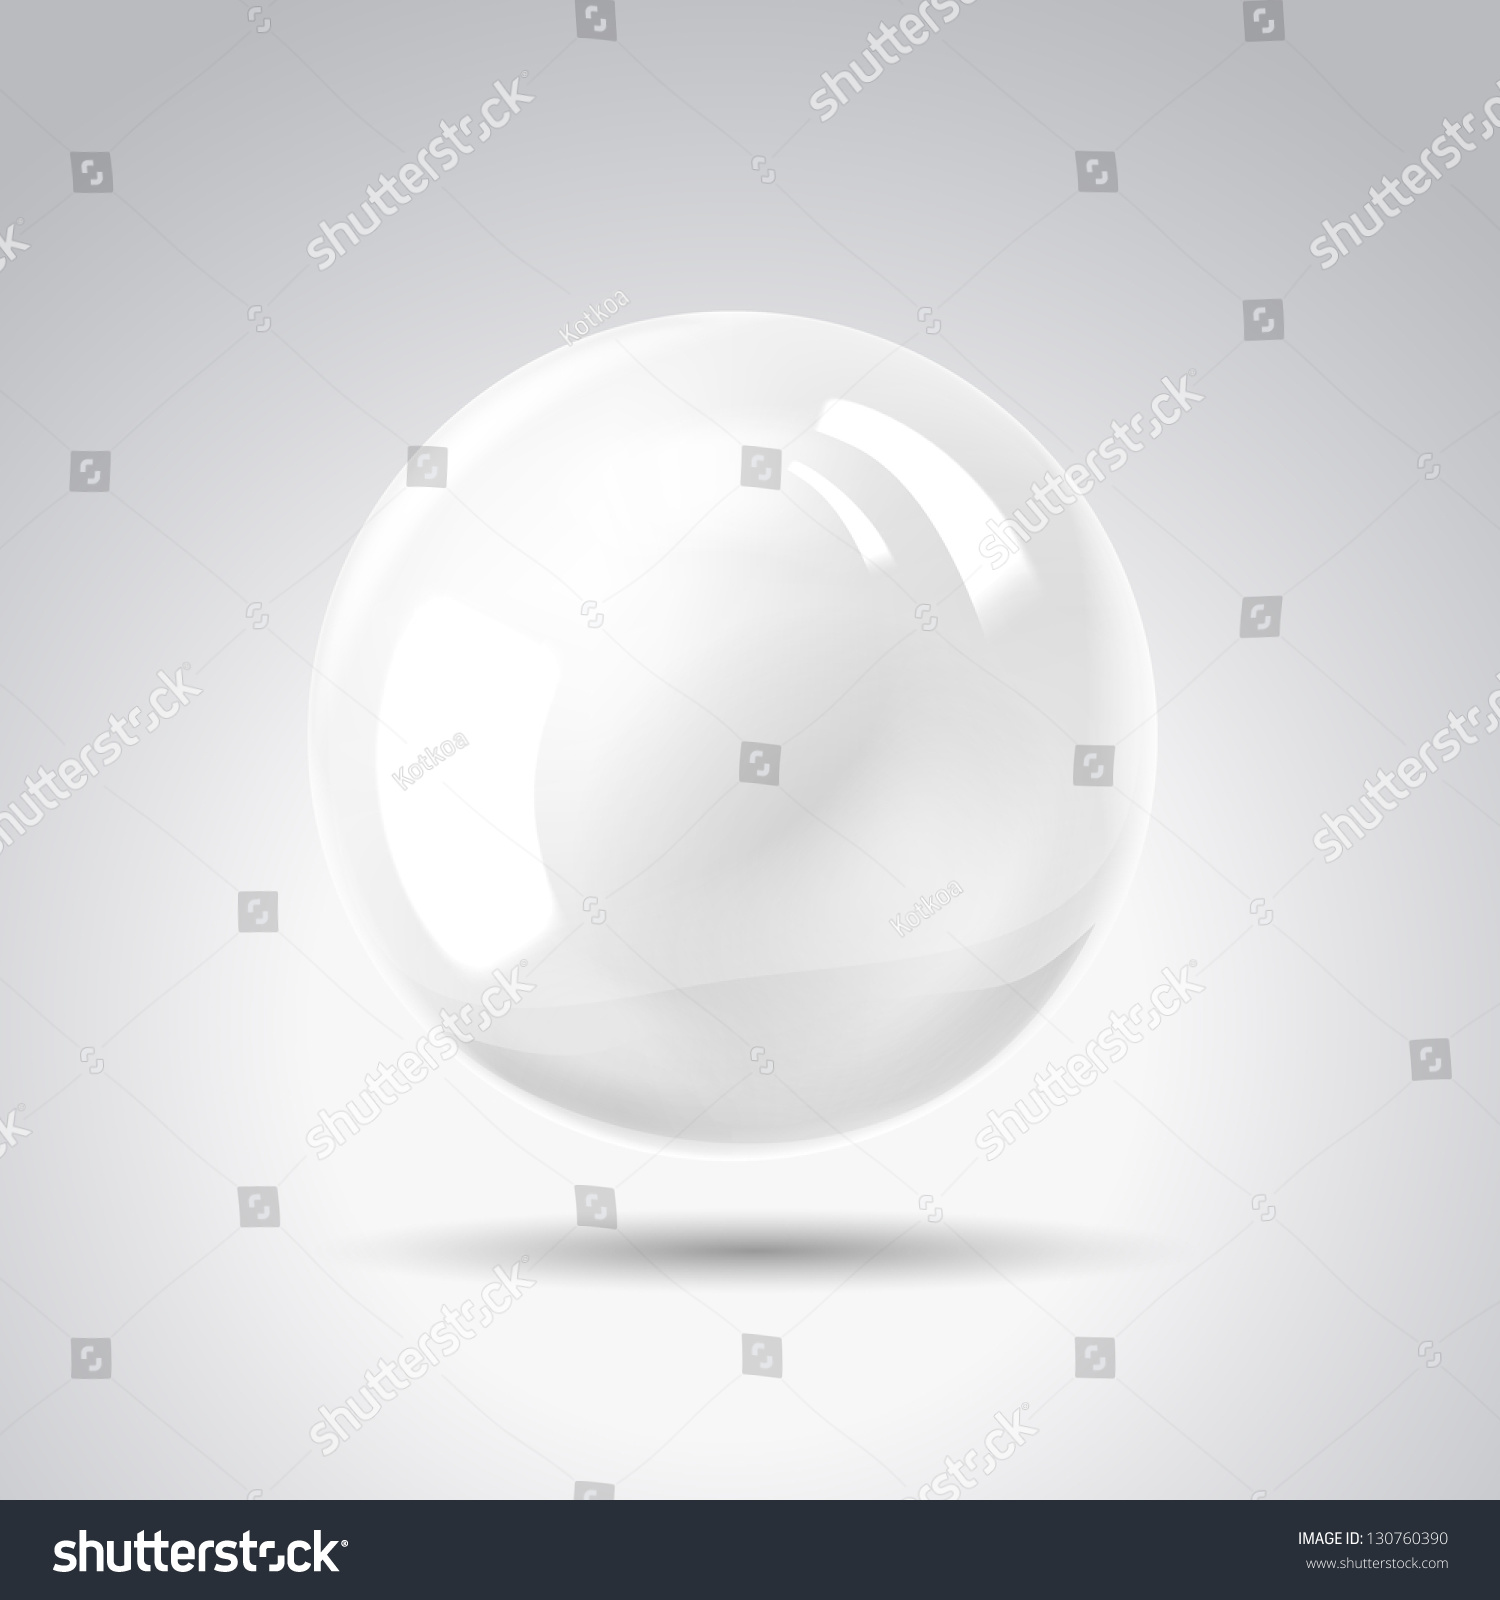 White pearl. Vector illustration, contains transparencies, gradients and effects. #130760390